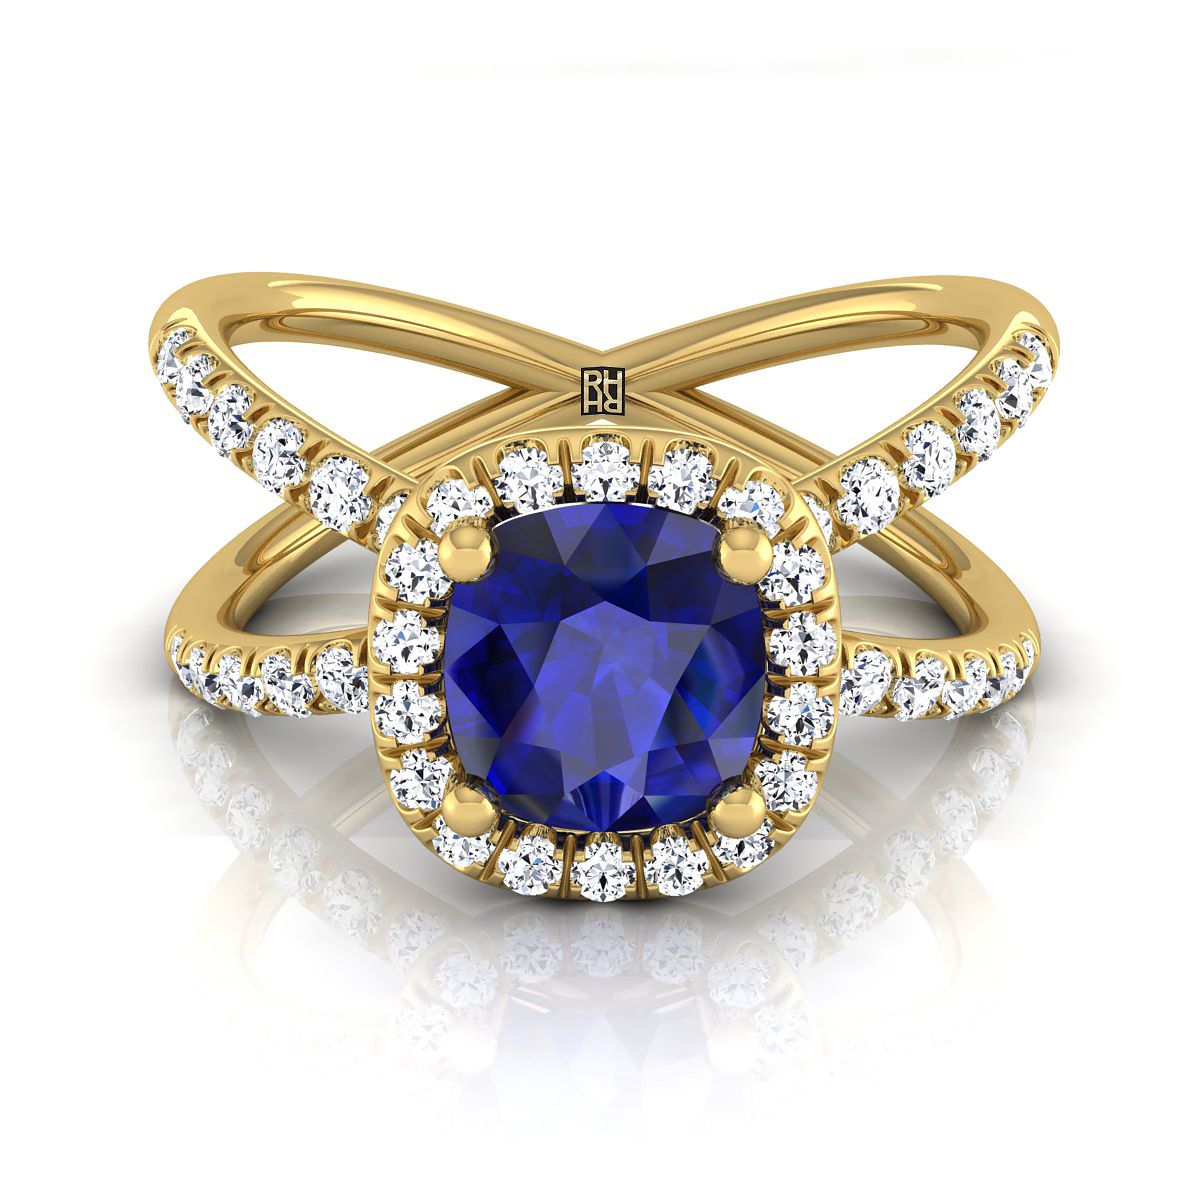 14K Yellow Gold Cushion Sapphire Open Criss Cross French Pave Diamond Engagement Ring -1/2ctw